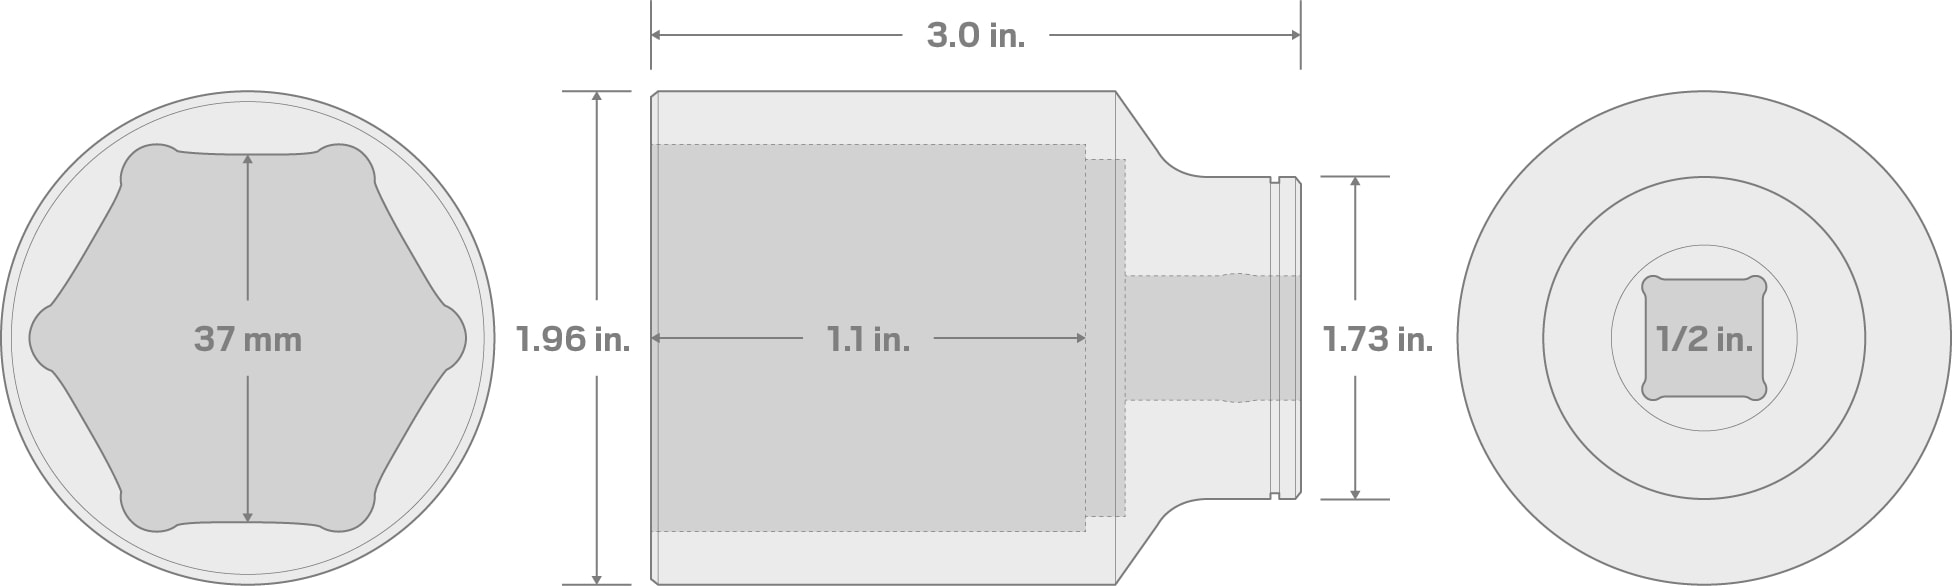 Specs for 1/2 Inch Drive x 37 mm Deep 6-Point Socket